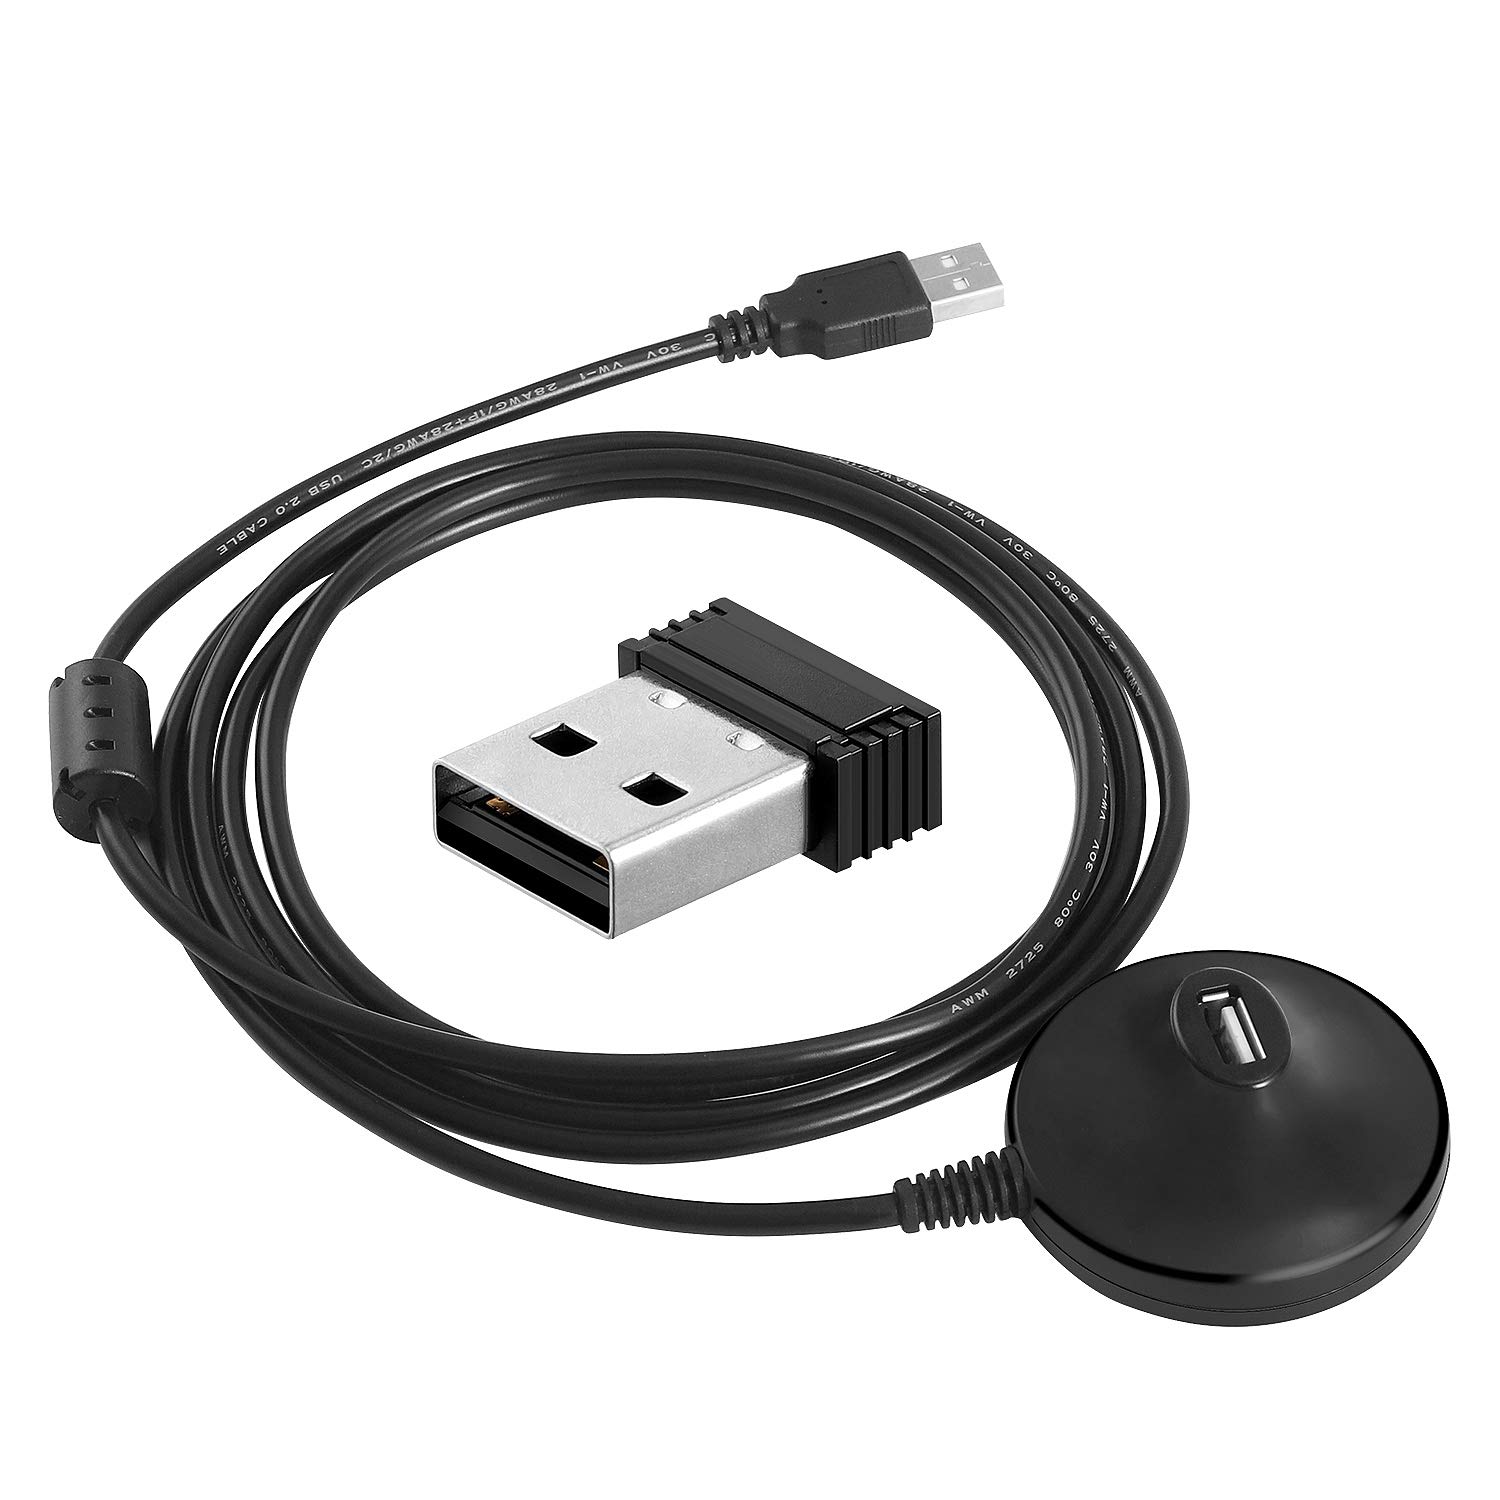 optimizing-ant-smart-trainer-connectivity-dongle-proximity-guide